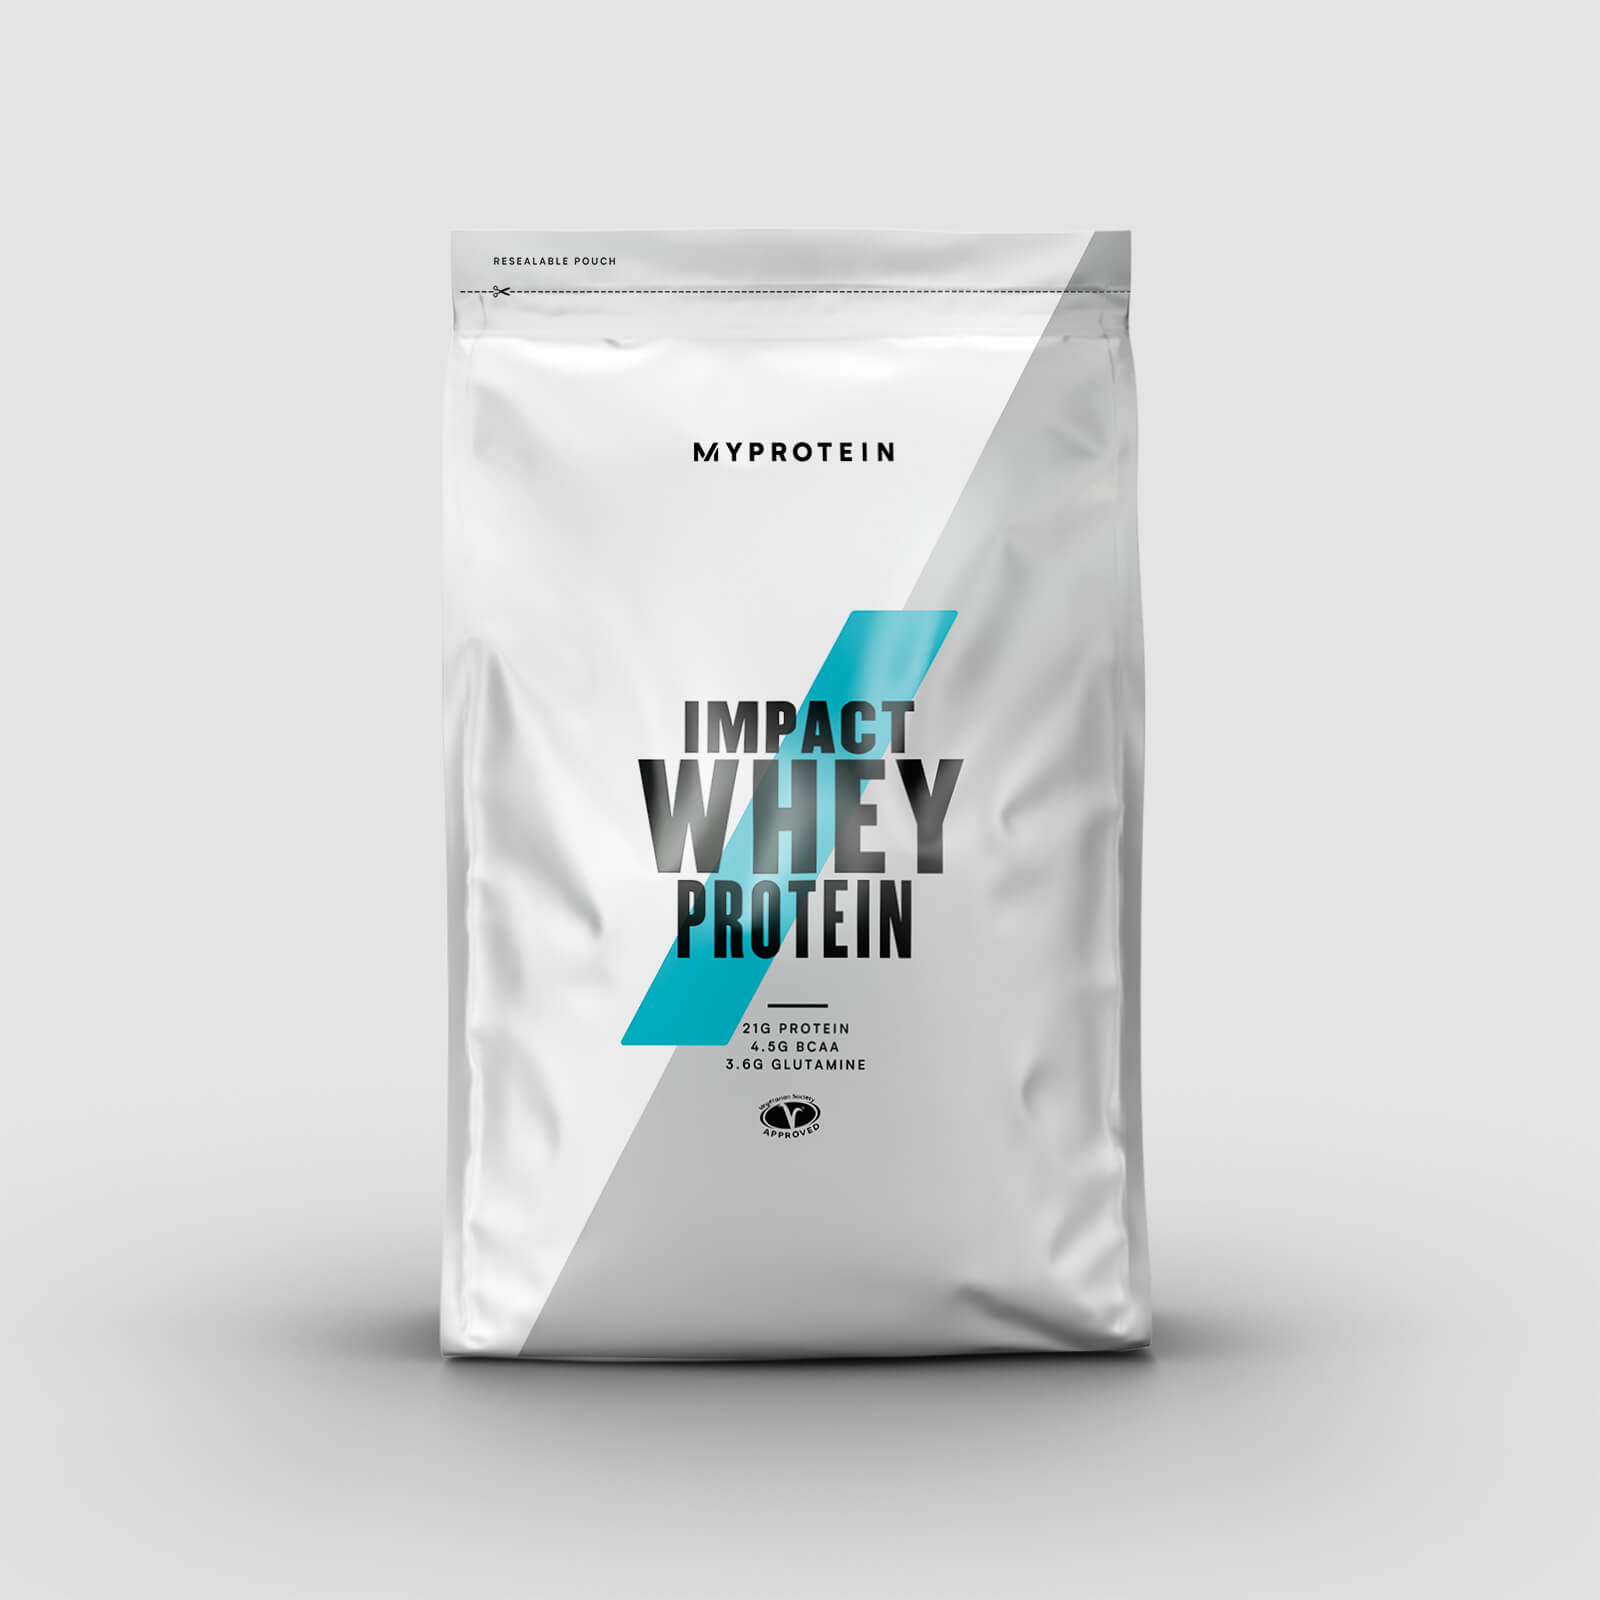 Impact Whey Protein Reviews - Features, Prices, Benefits, And More